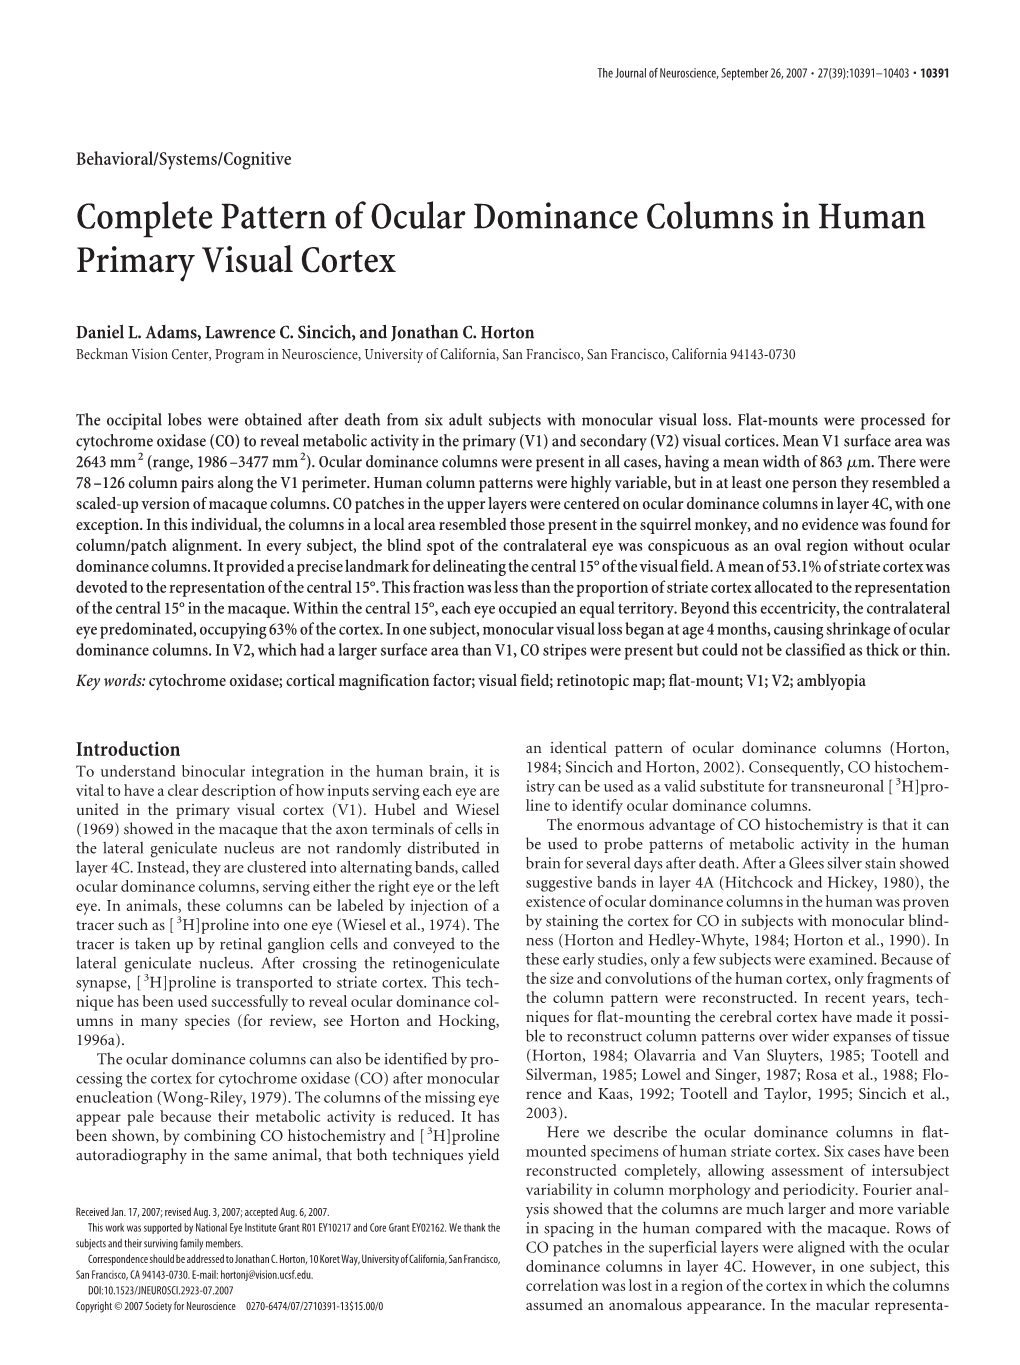 Complete Pattern of Ocular Dominance Columns in Human Primary Visual Cortex